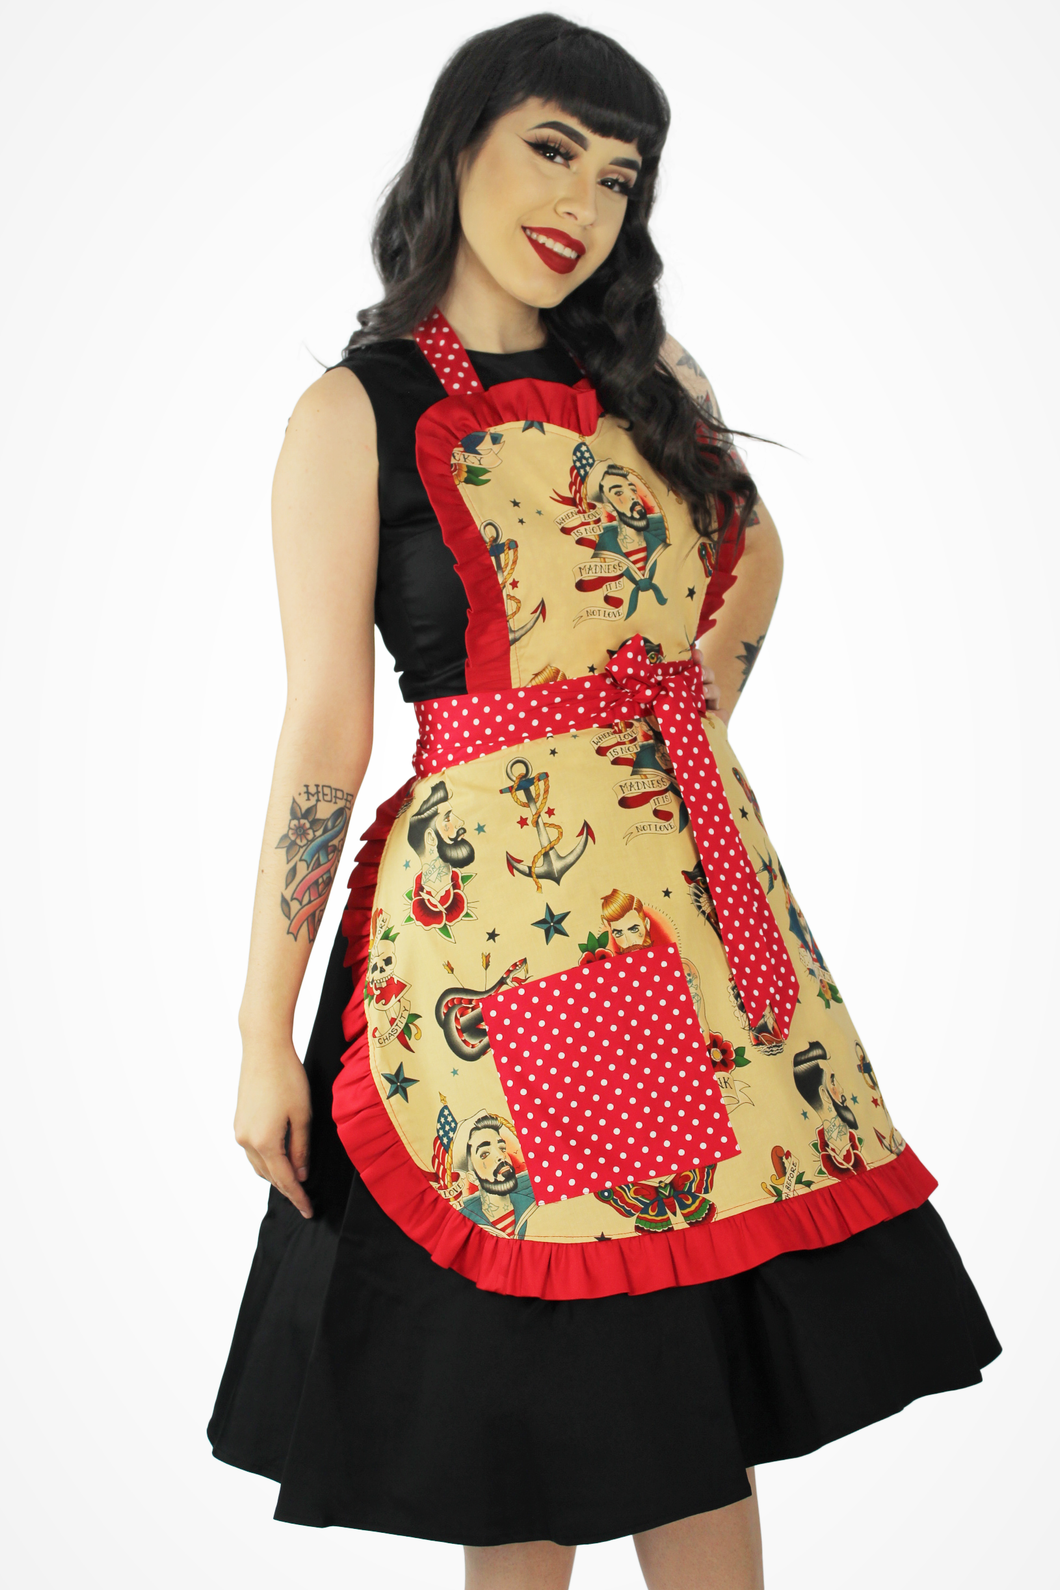 Model wearing apron, Pictured from the side, Model smiling